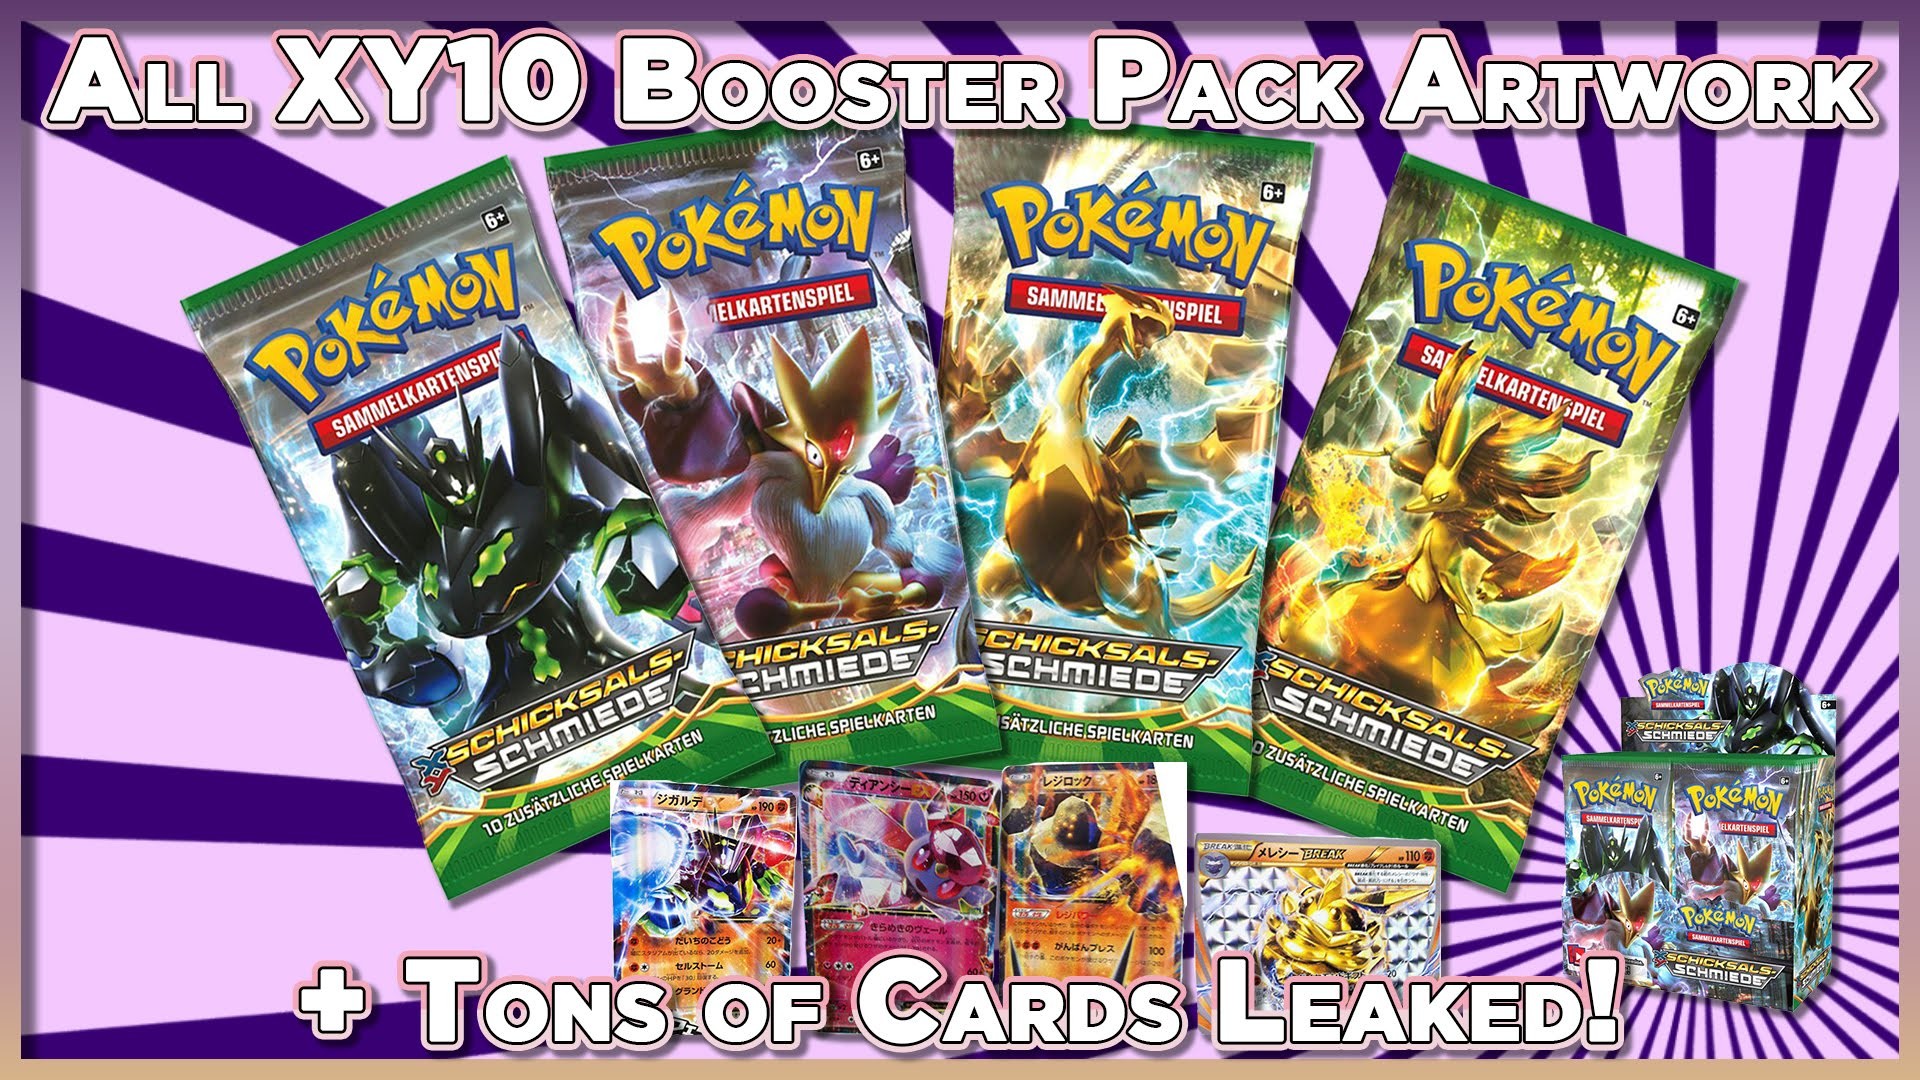 1920x1080 Pokemon News | ALL XY10 Fates Collide Booster Pack Artwork/Booster Box  Images + Tons of Card Leaks! - YouTube